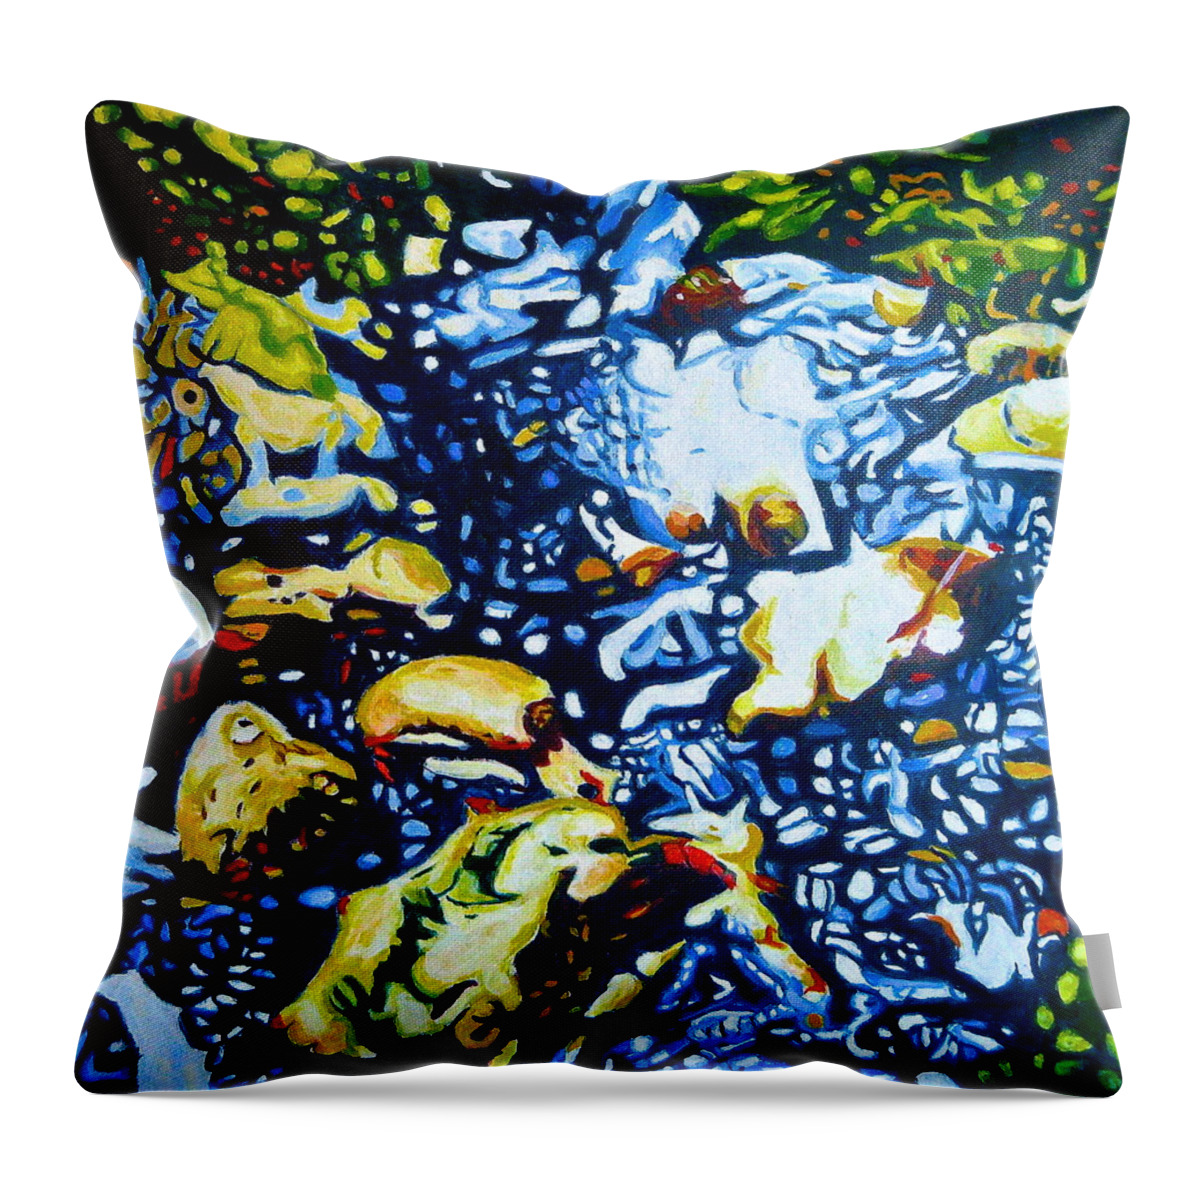 Landscape River Throw Pillow featuring the painting Sourcce by Enrique Ojembarrena